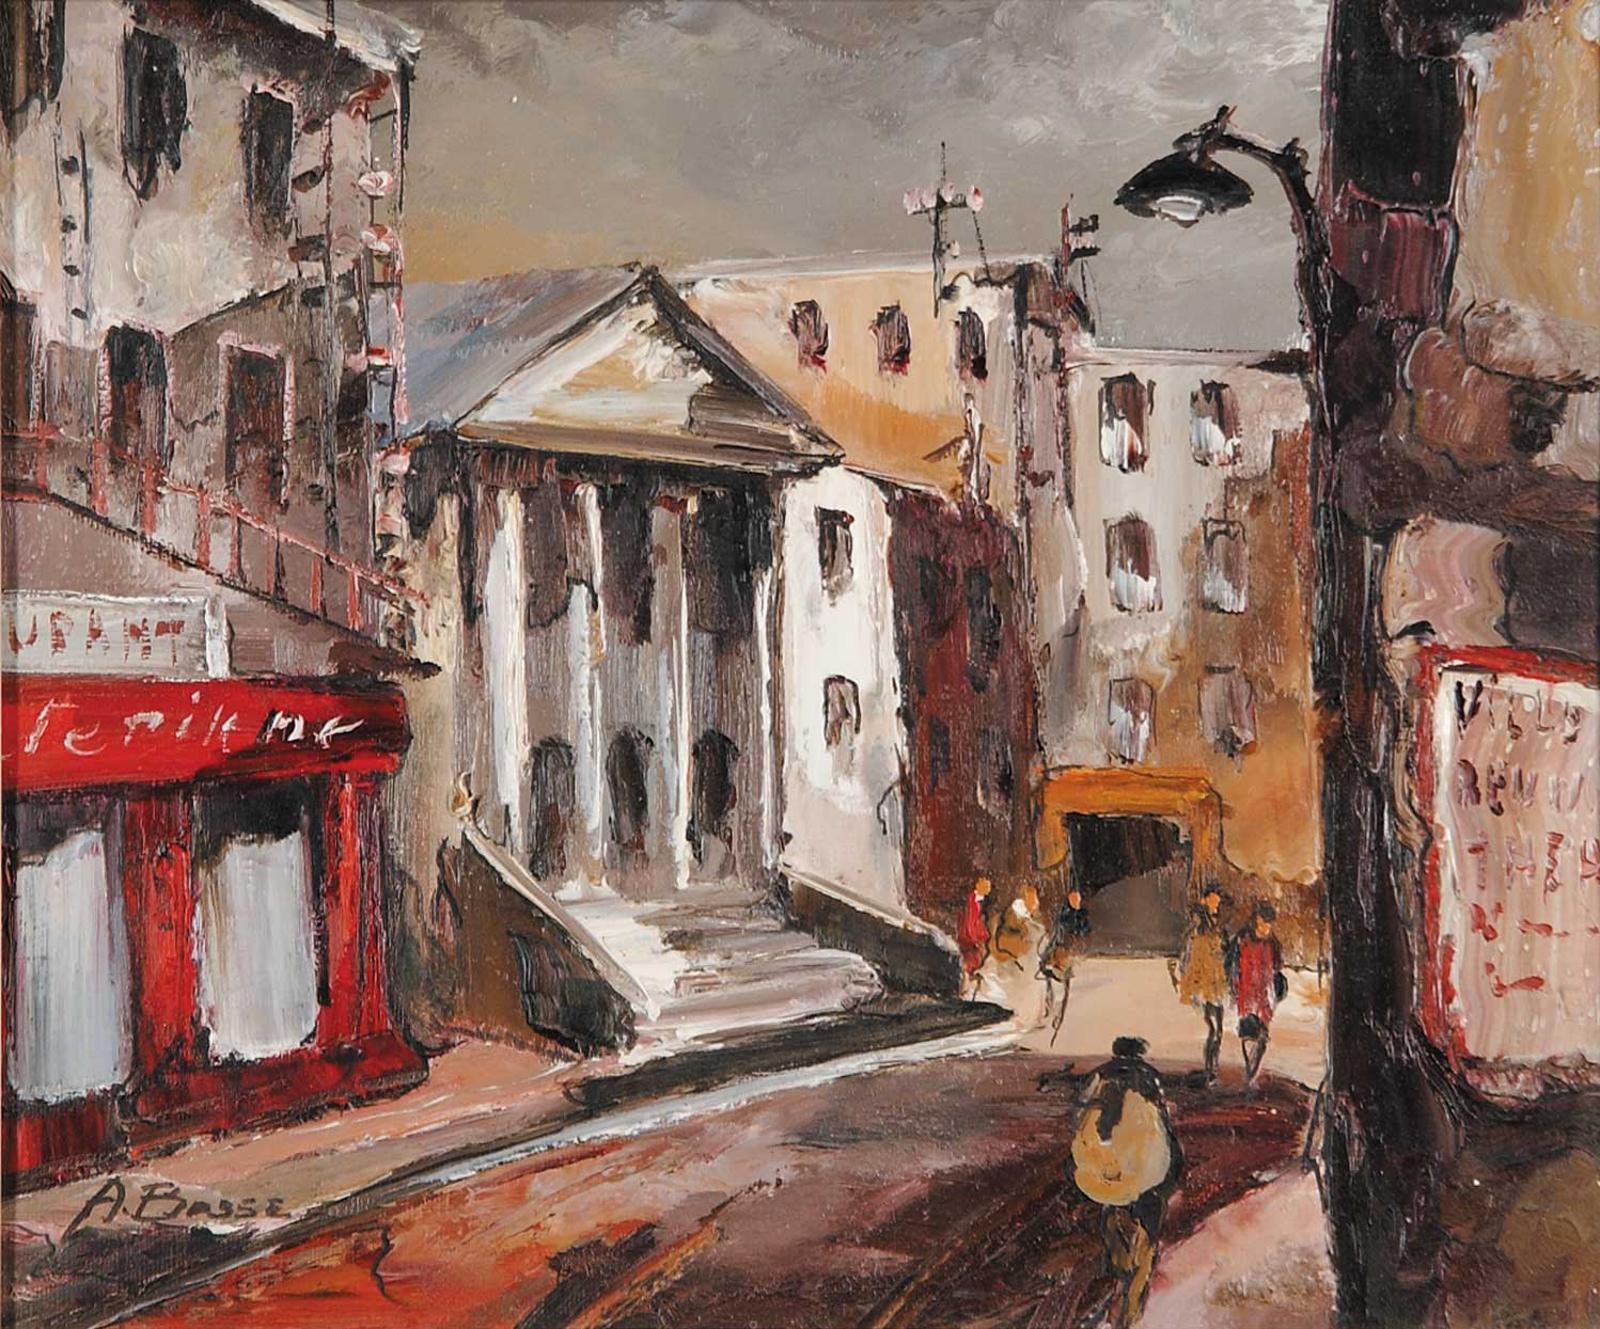 Andre Besse (1922-1972) - Rue Marche Place Royale Montreal